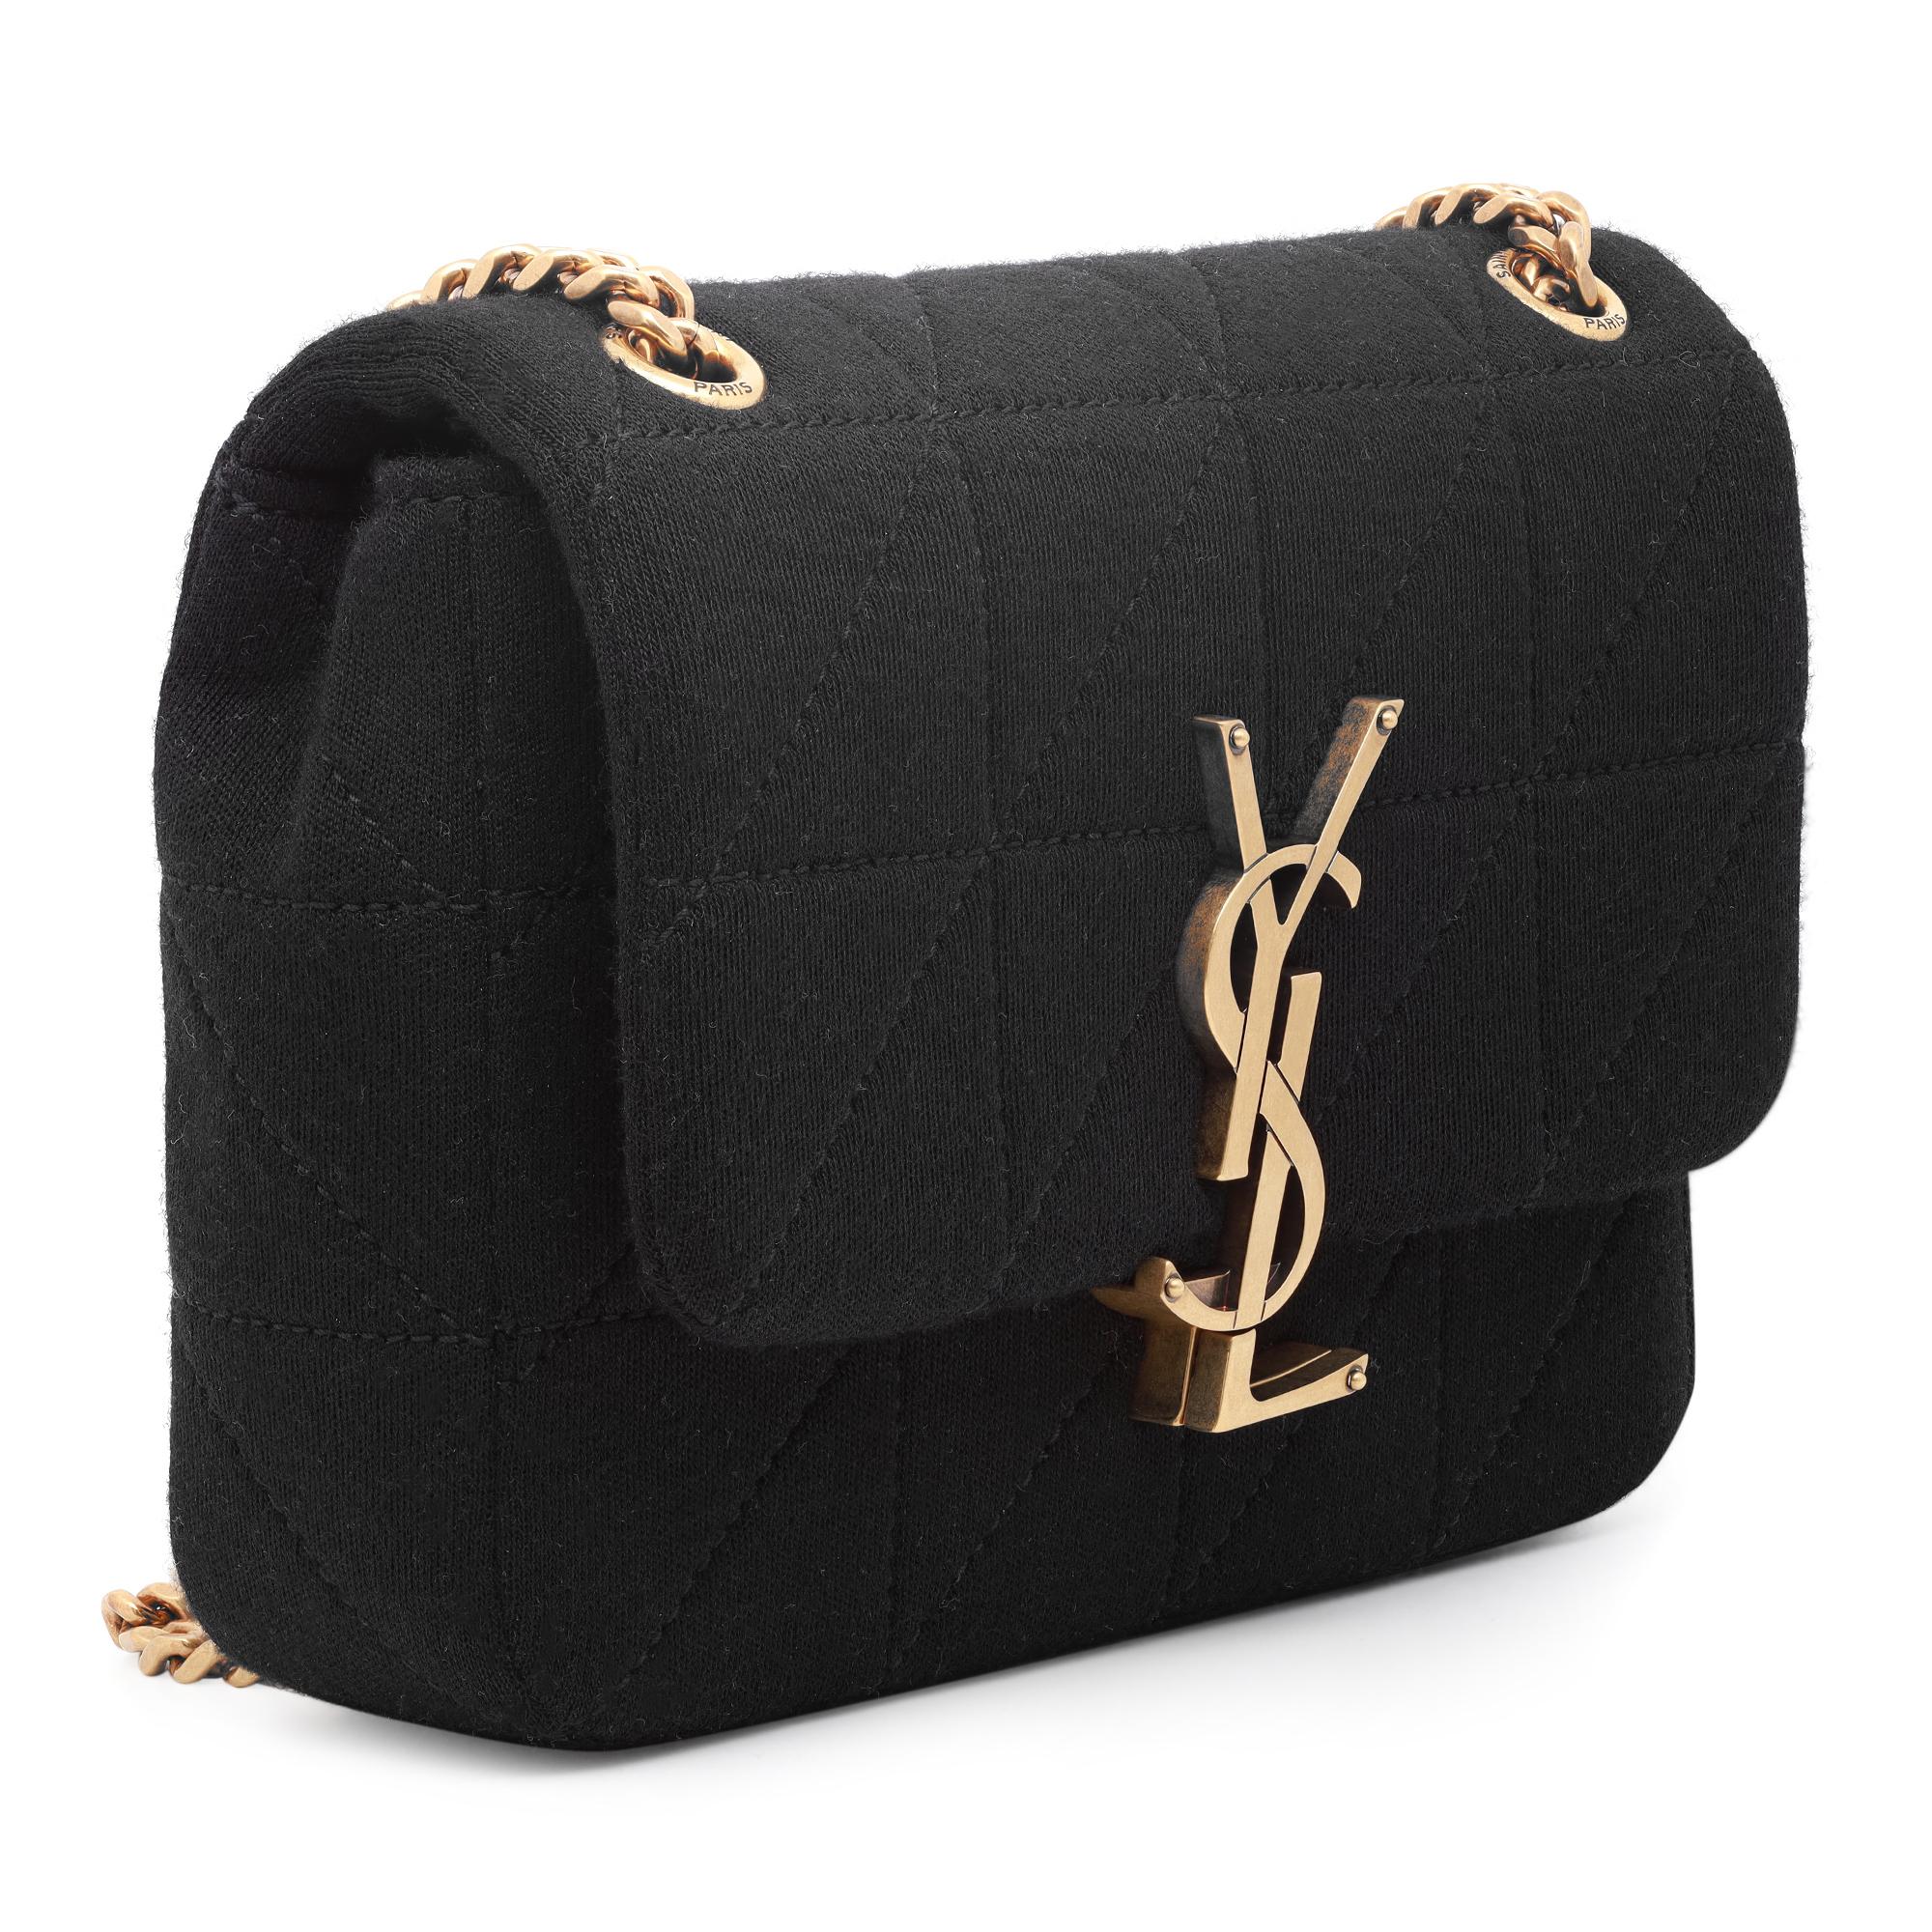 does ysl support israel